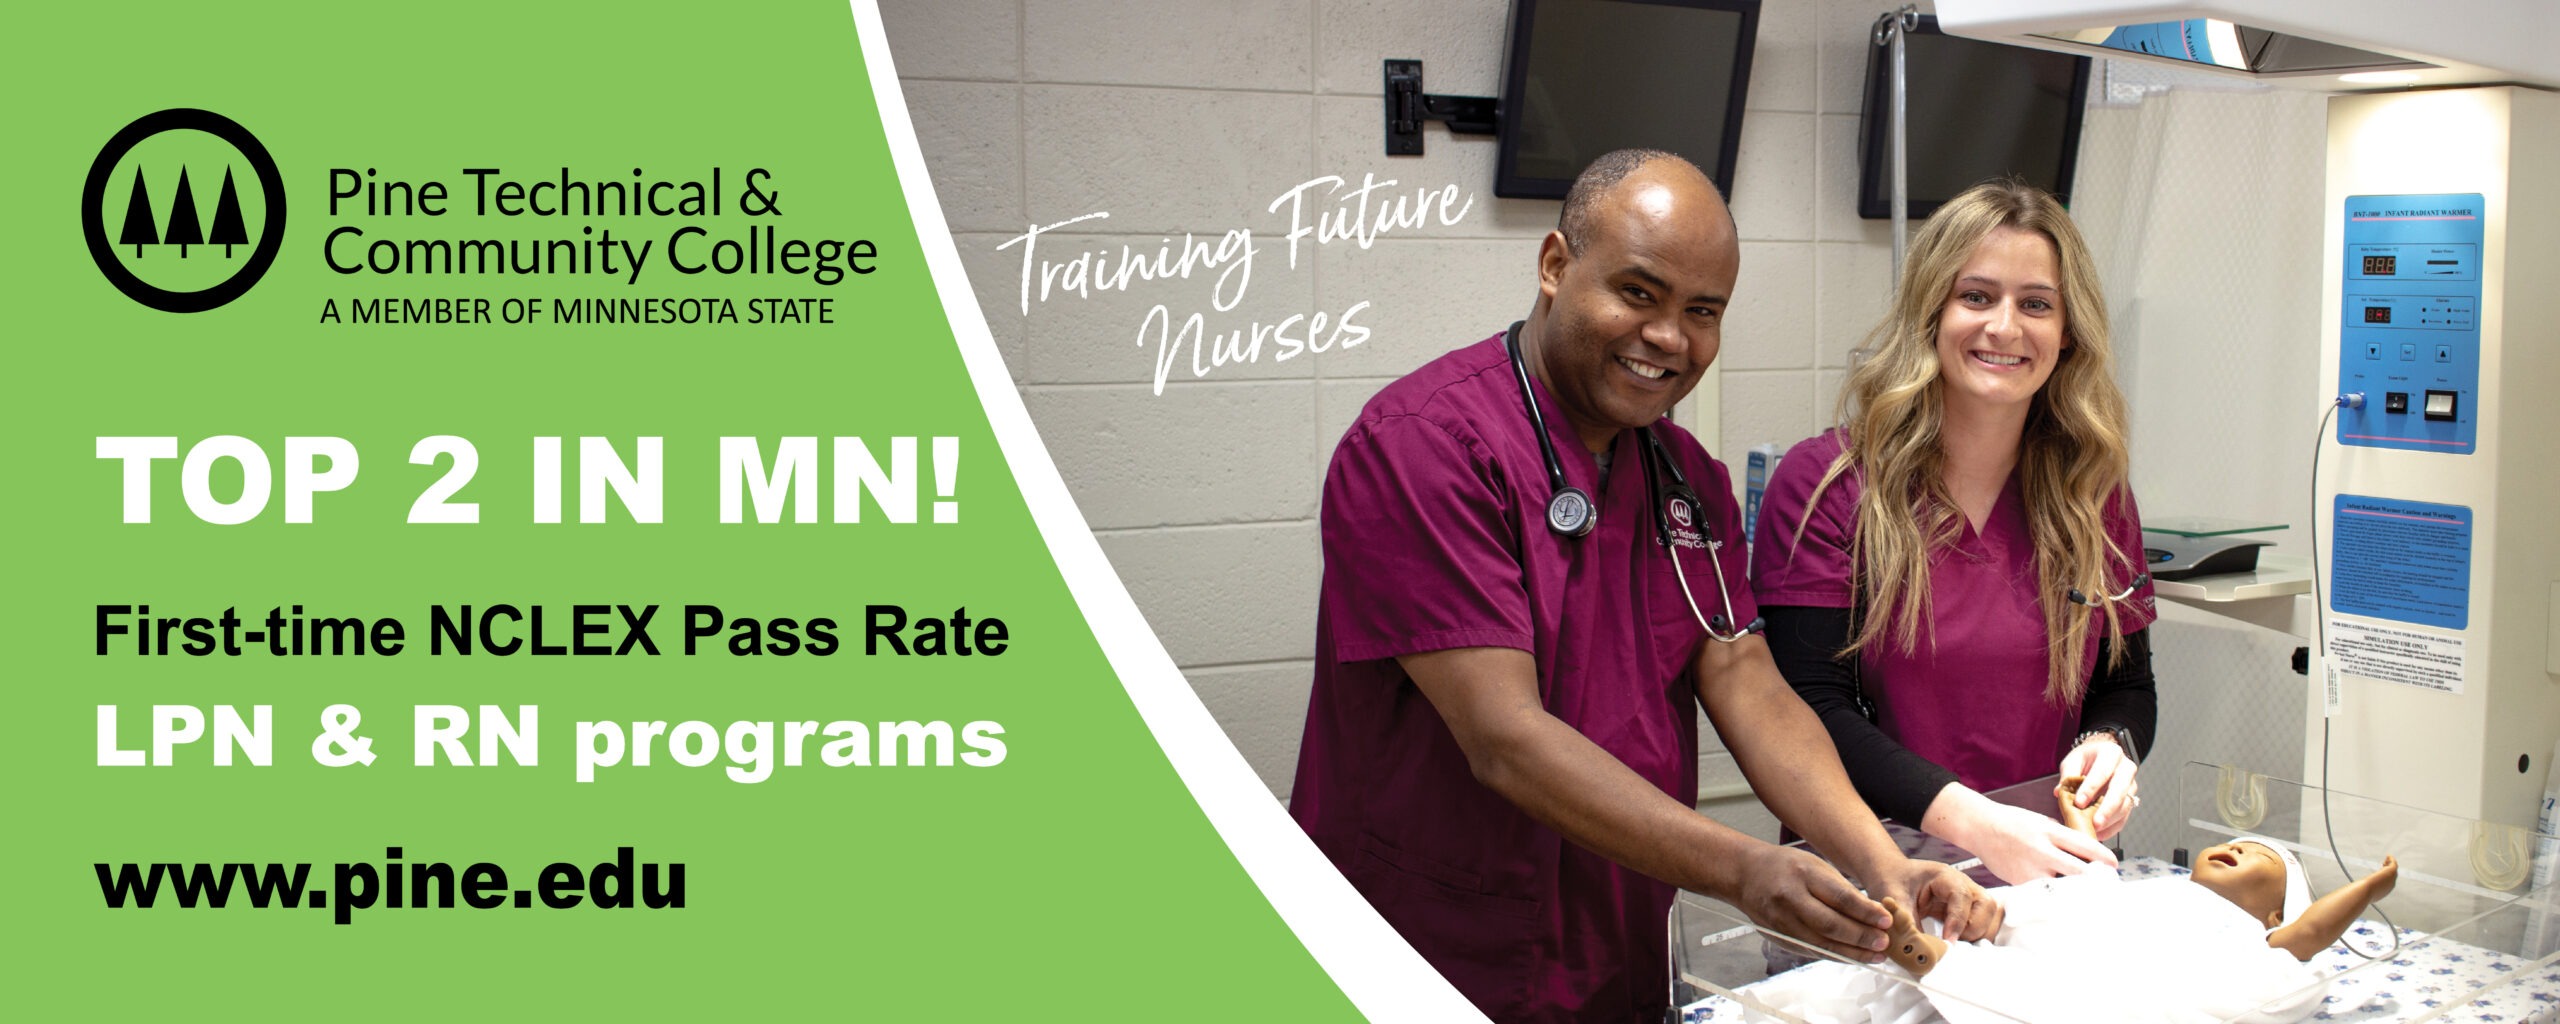 Top 2 in MN! First-time NCLEX Pass Rate. PTCC LPN & RN programs.